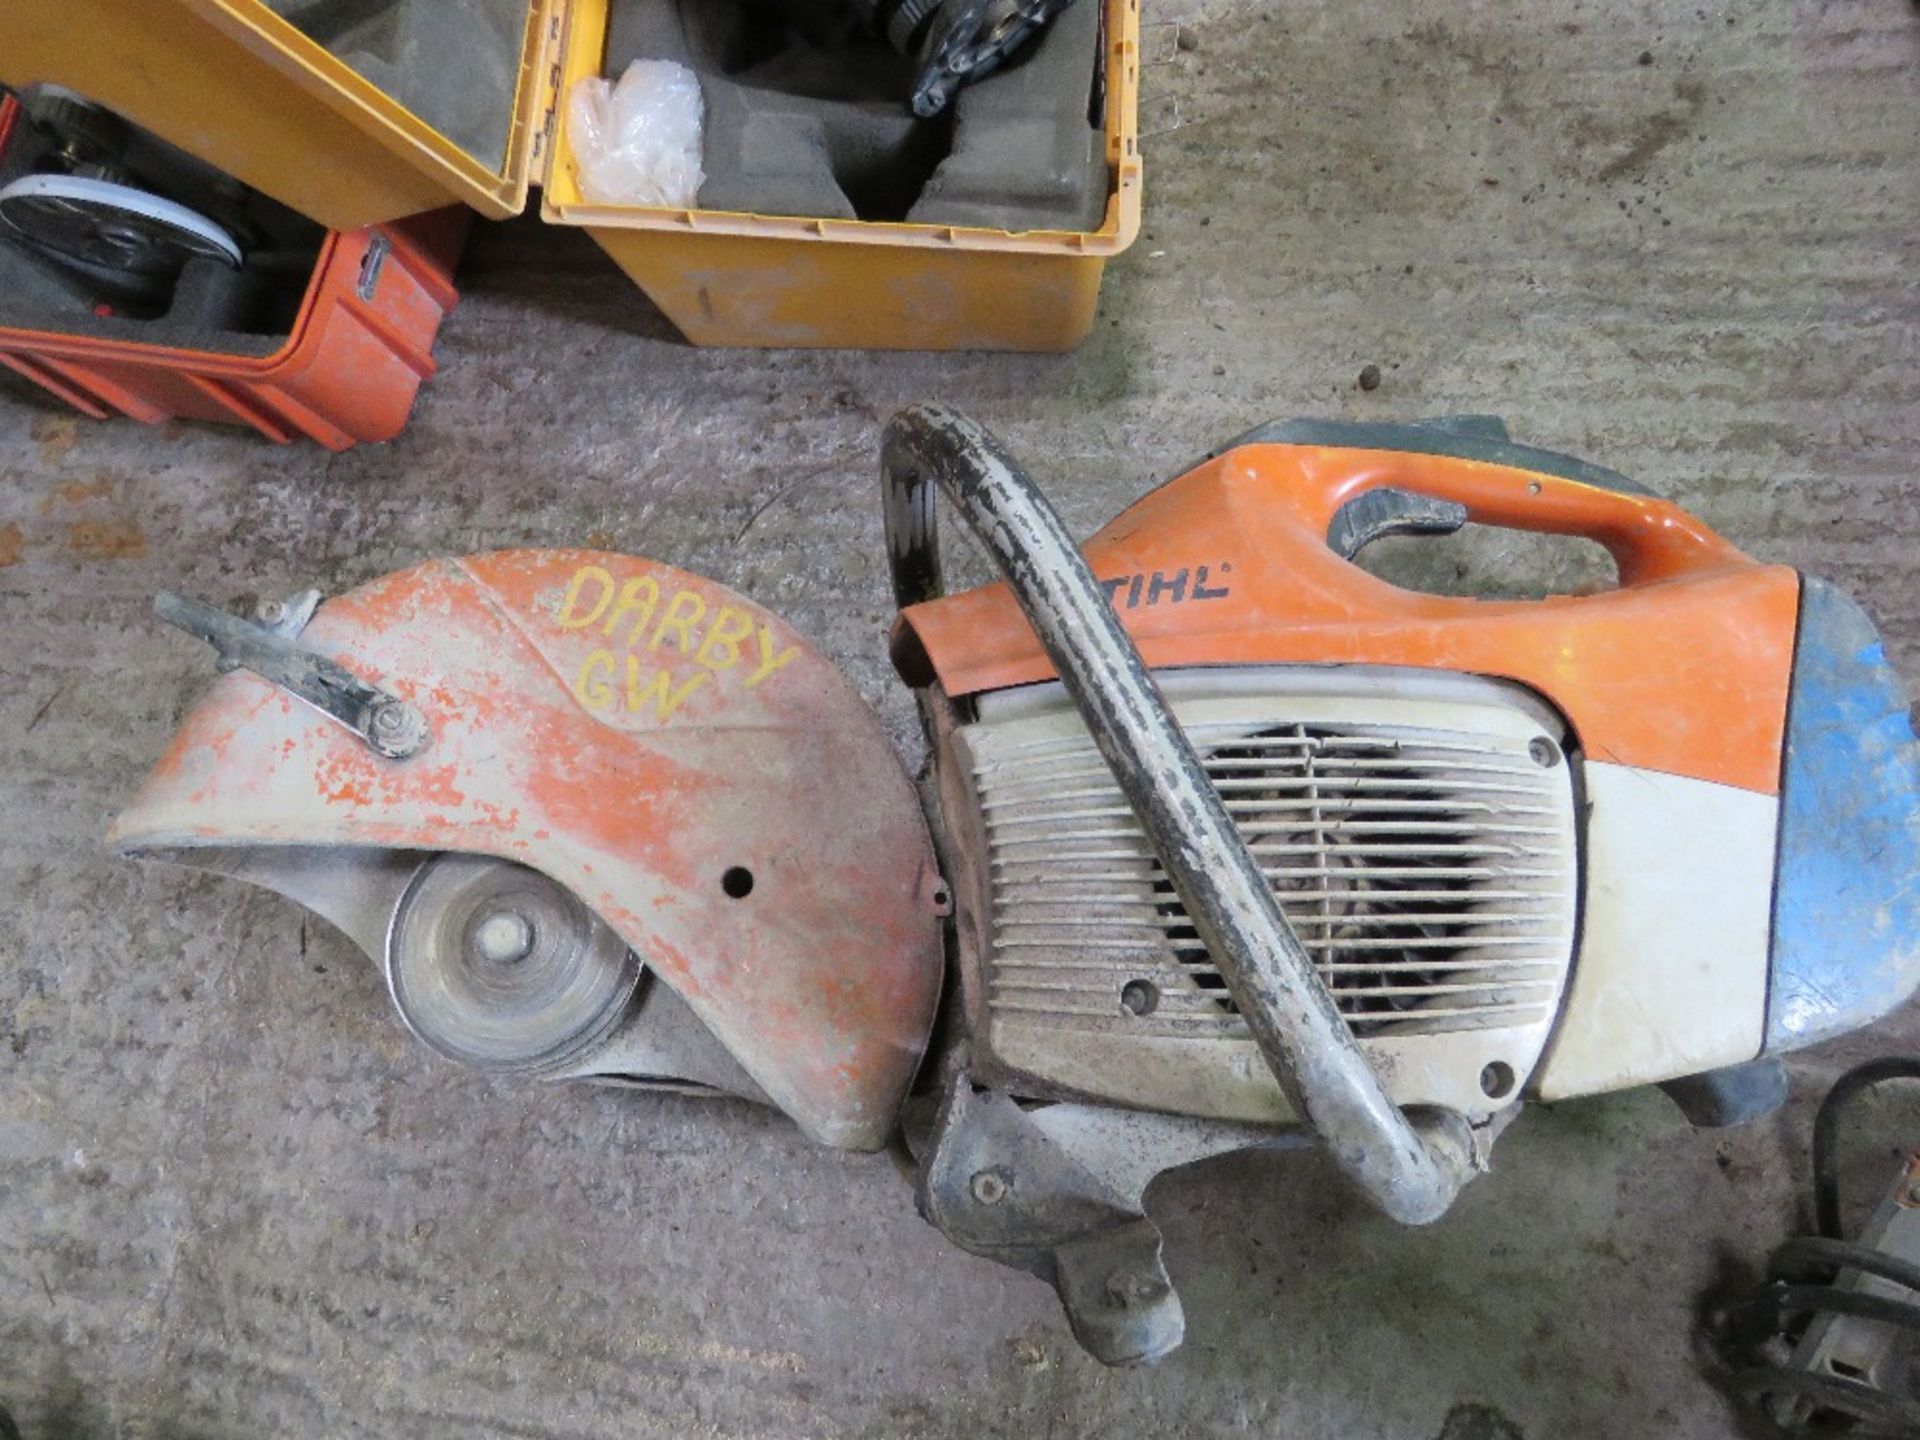 STIHL TS410 PETROL SAW. DIRECT FROM A LOCAL GROUNDWORKS COMPANY AS PART OF THEIR RESTRUCTURING PR - Image 2 of 3